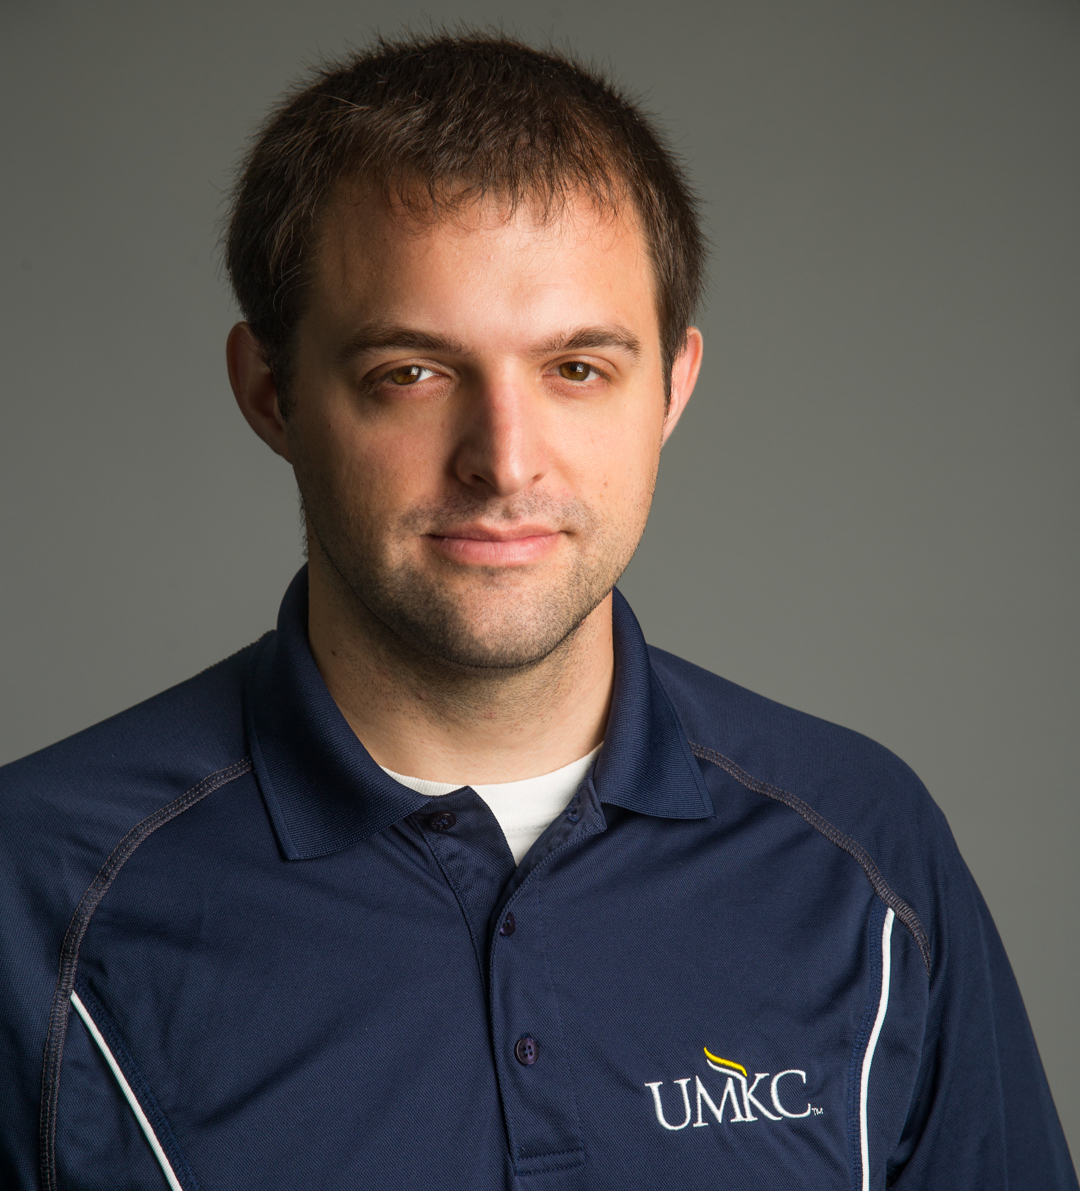 Anthony Maly wears a collared UMKC shirt